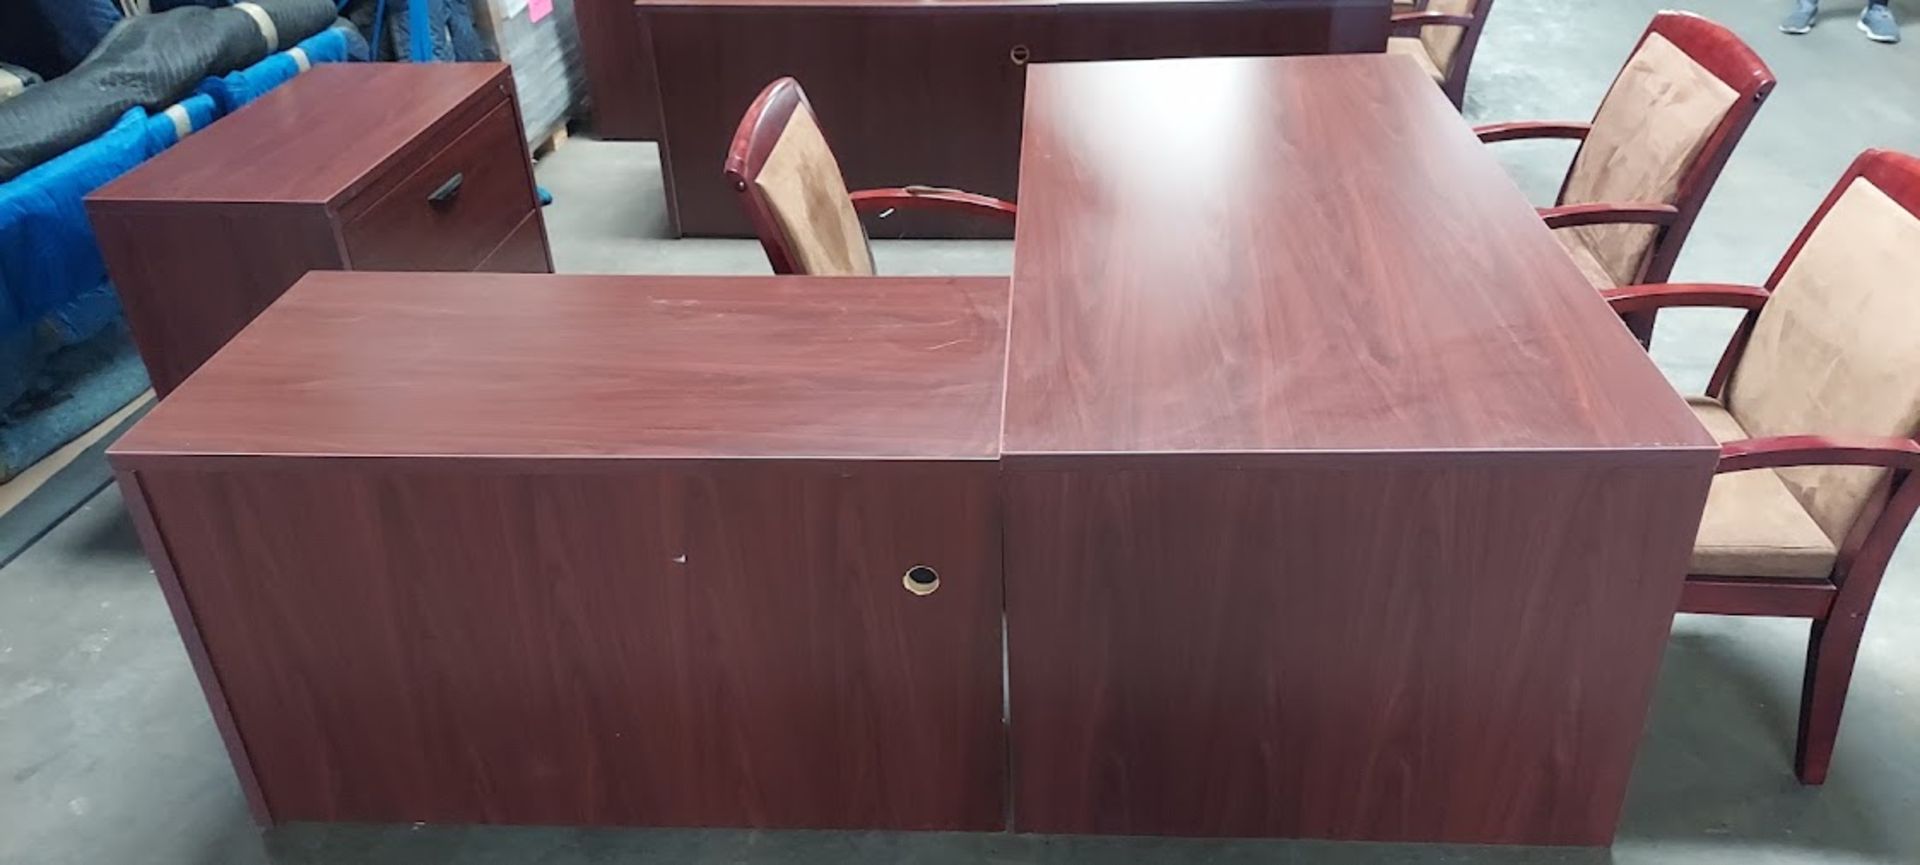 Executive L Shaped Office Desk, 3 - Chairs, 2 Drawer Latheral Filing Cabinet - Image 3 of 7